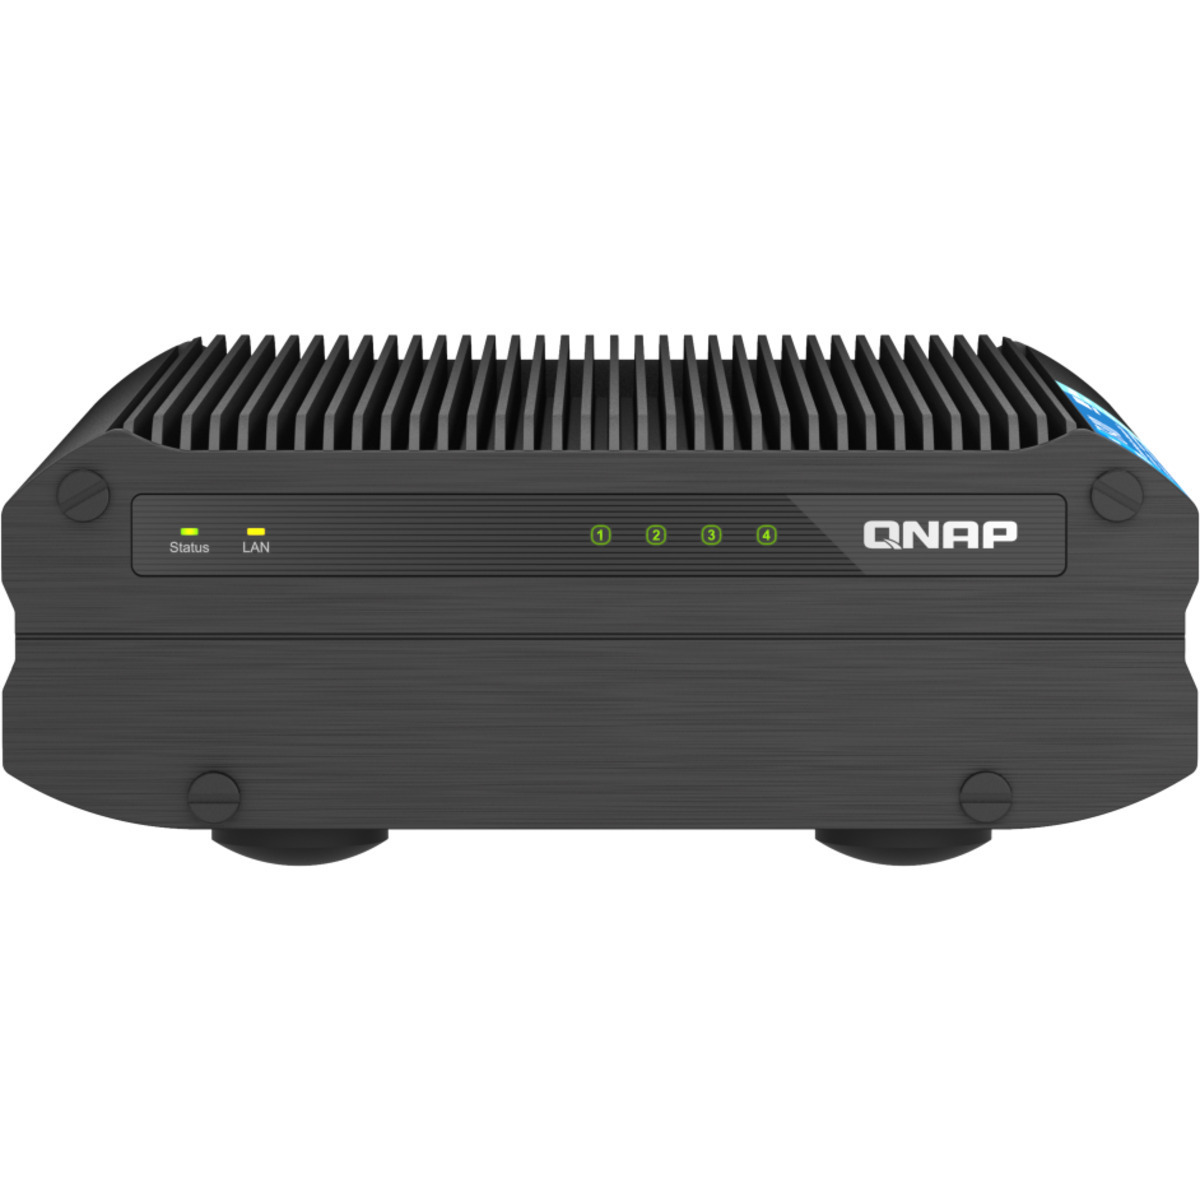 QNAP TS-i410X 4tb 4-Bay Desktop Multimedia / Power User / Business NAS - Network Attached Storage Device 2x2tb Crucial MX500 CT2000MX500SSD1 2.5 560/510MB/s SATA 6Gb/s SSD CONSUMER Class Drives Installed - Burn-In Tested TS-i410X